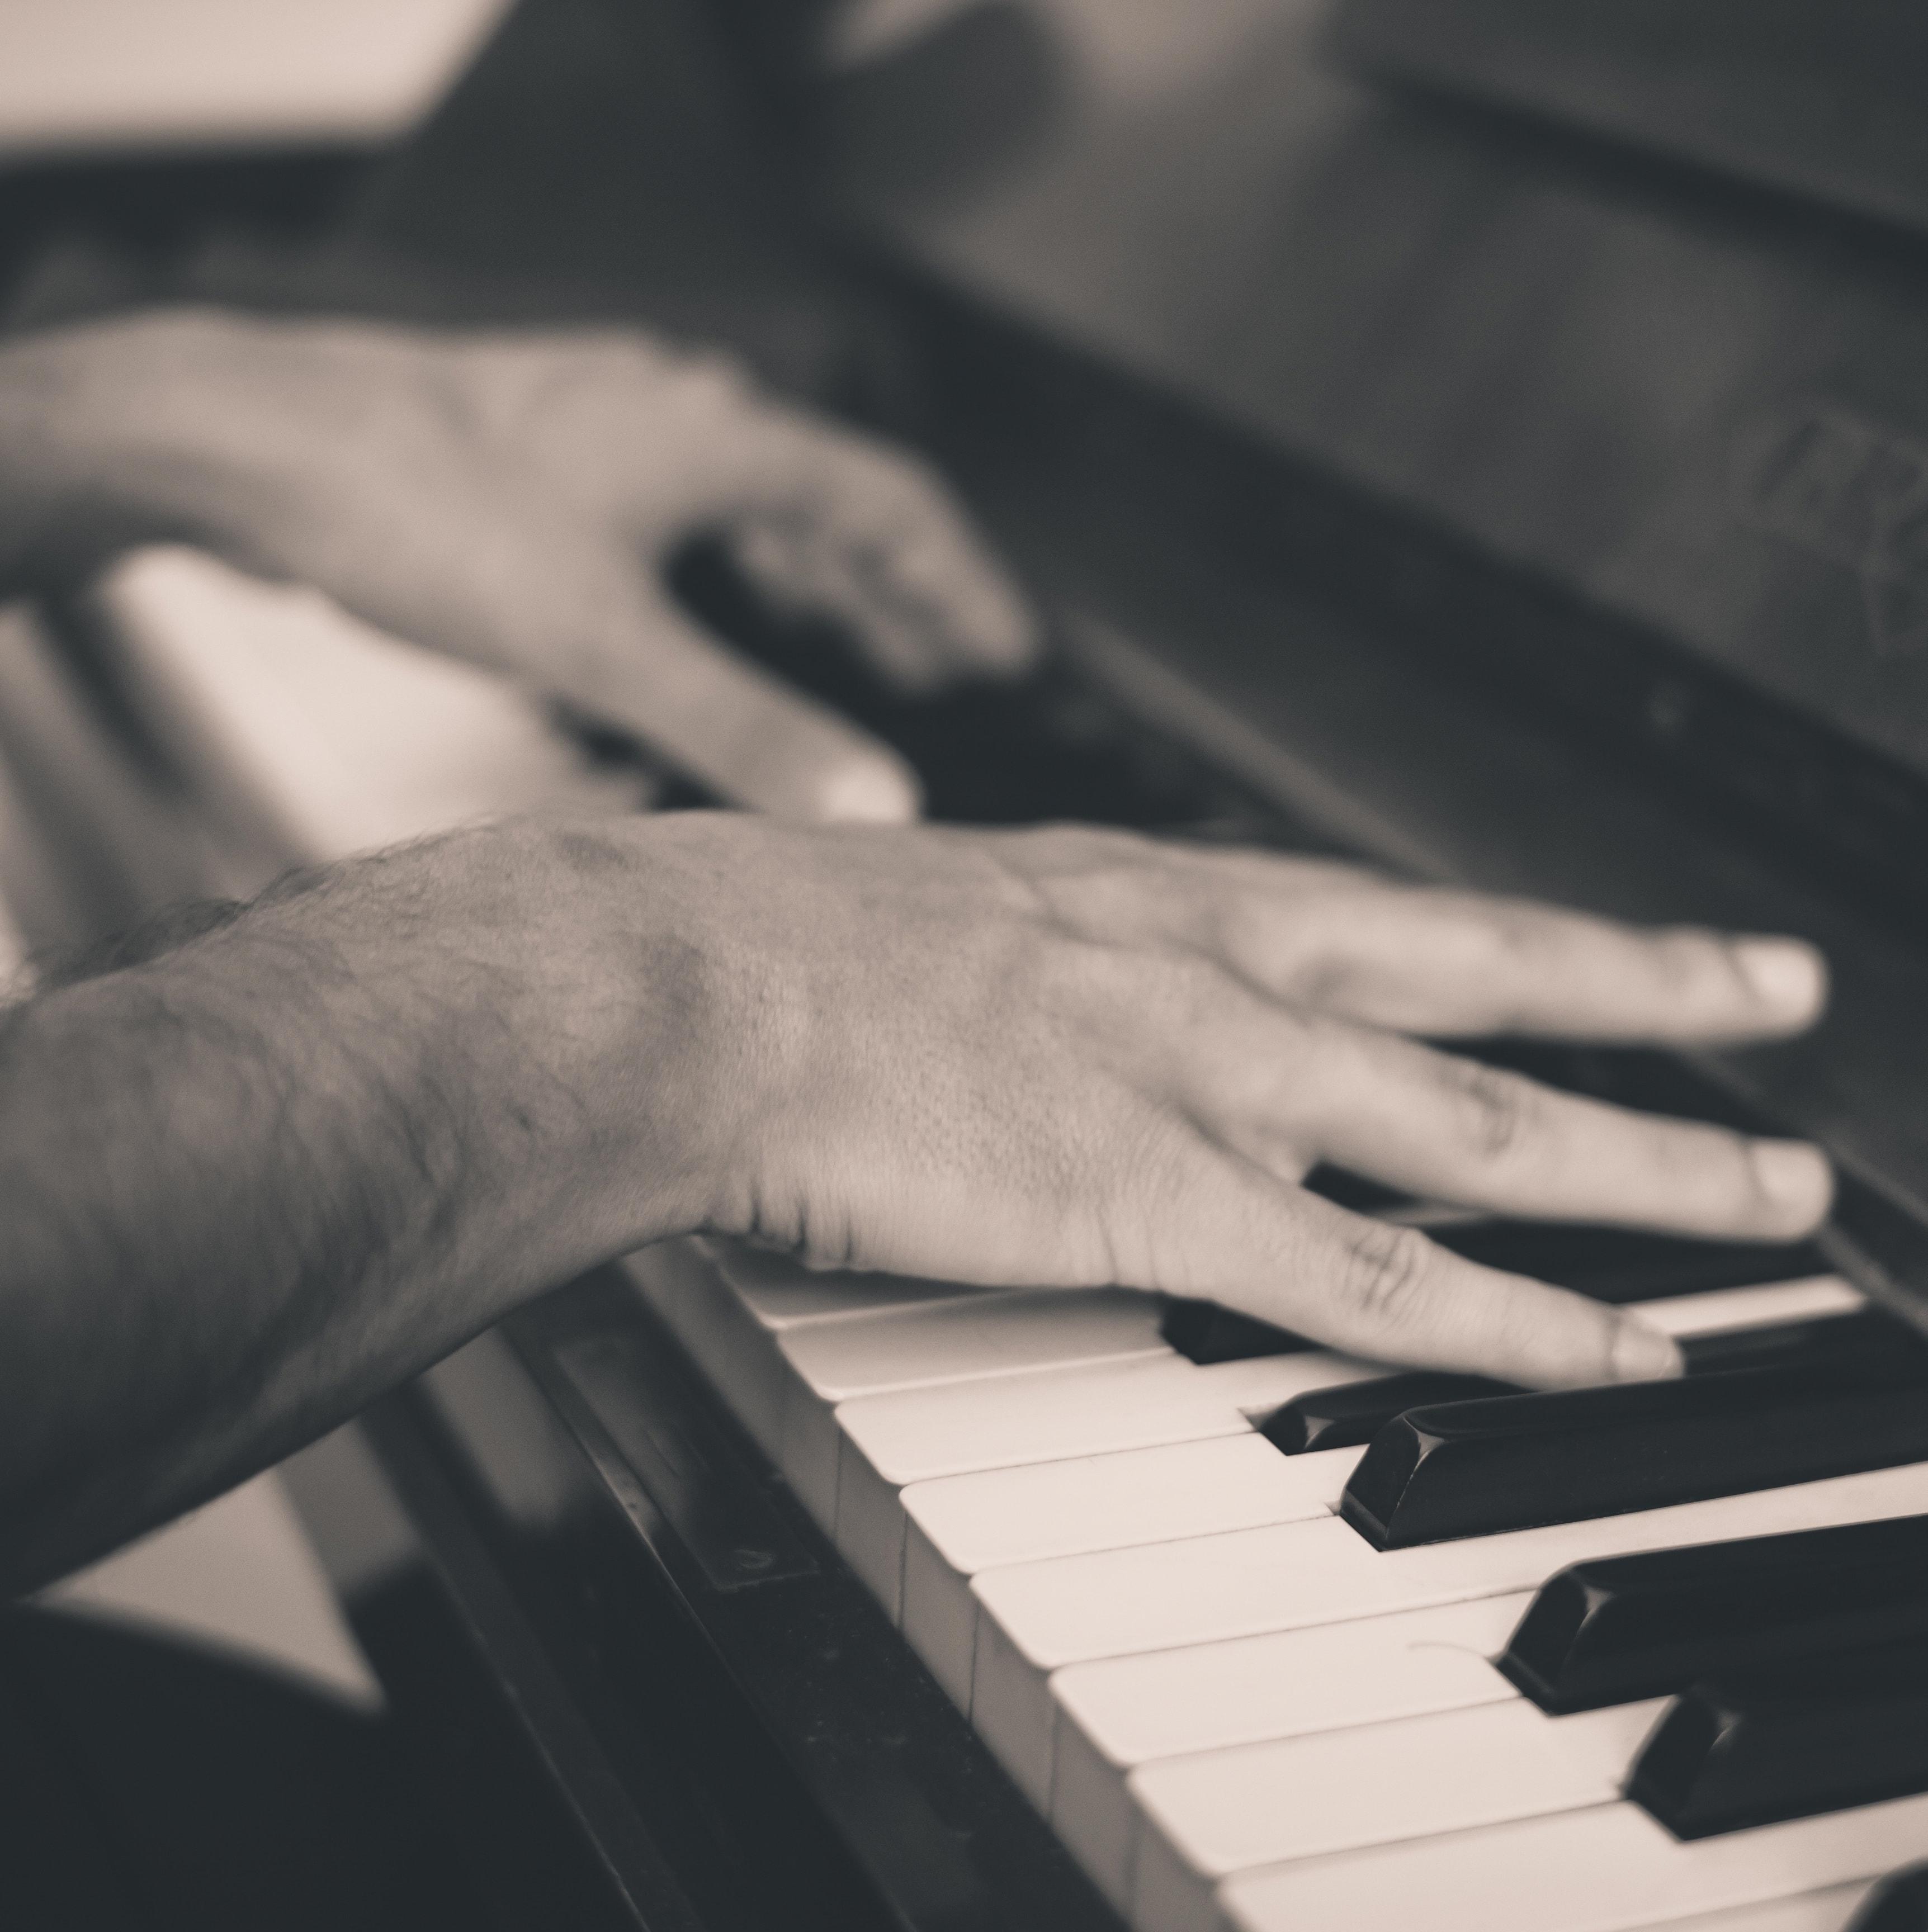 30 Unforgettable Piano Melodies for Productive Study and Ultimate Deep Focus